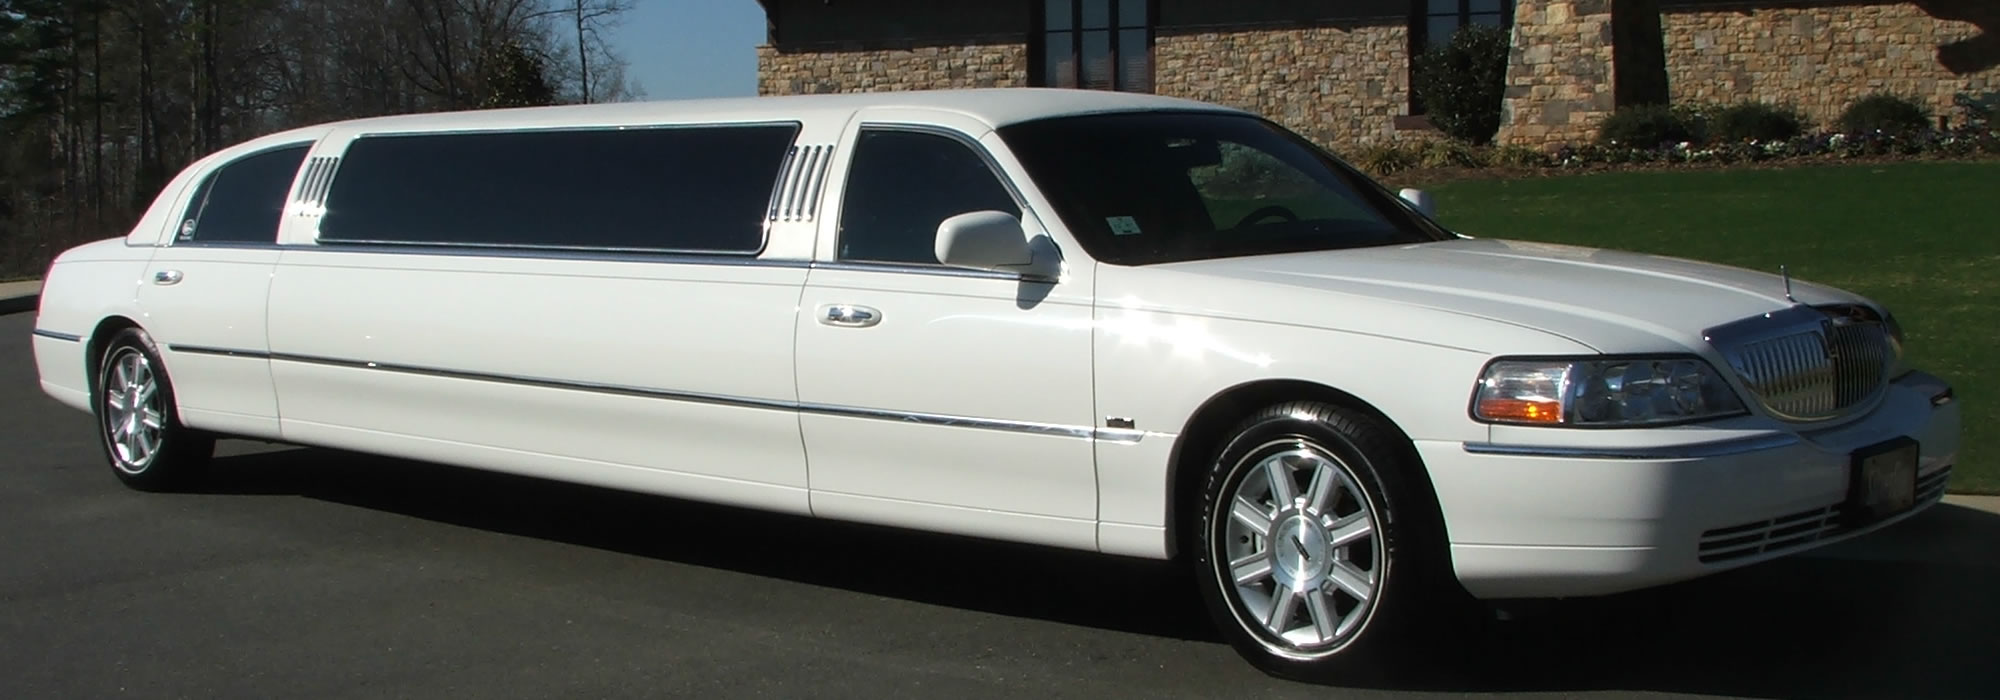 Limo Hire Bracknell